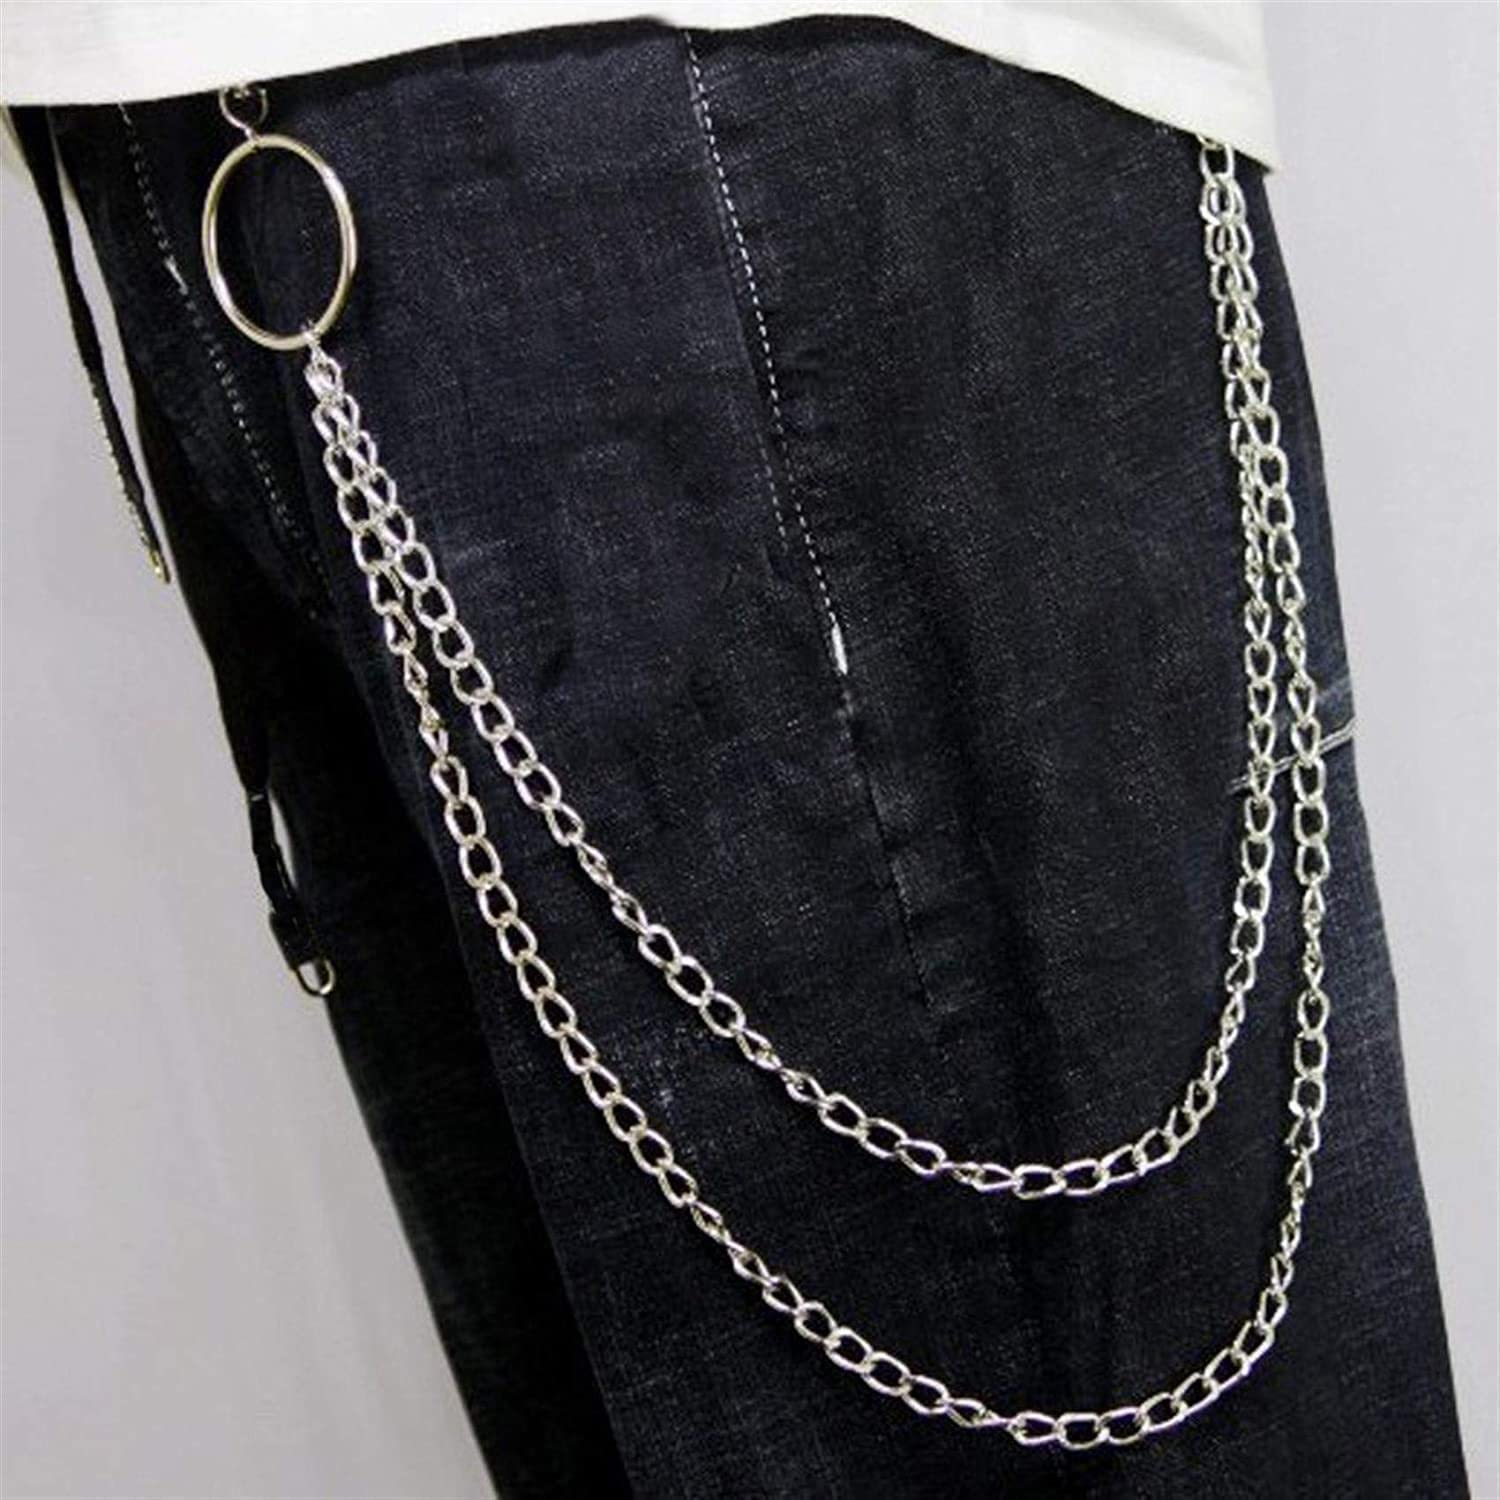 Jeans Chains Wallet Pants Chain Silver Pocket Punk Chain Hip Hop Rock Chains Simple and Sophisticated Design